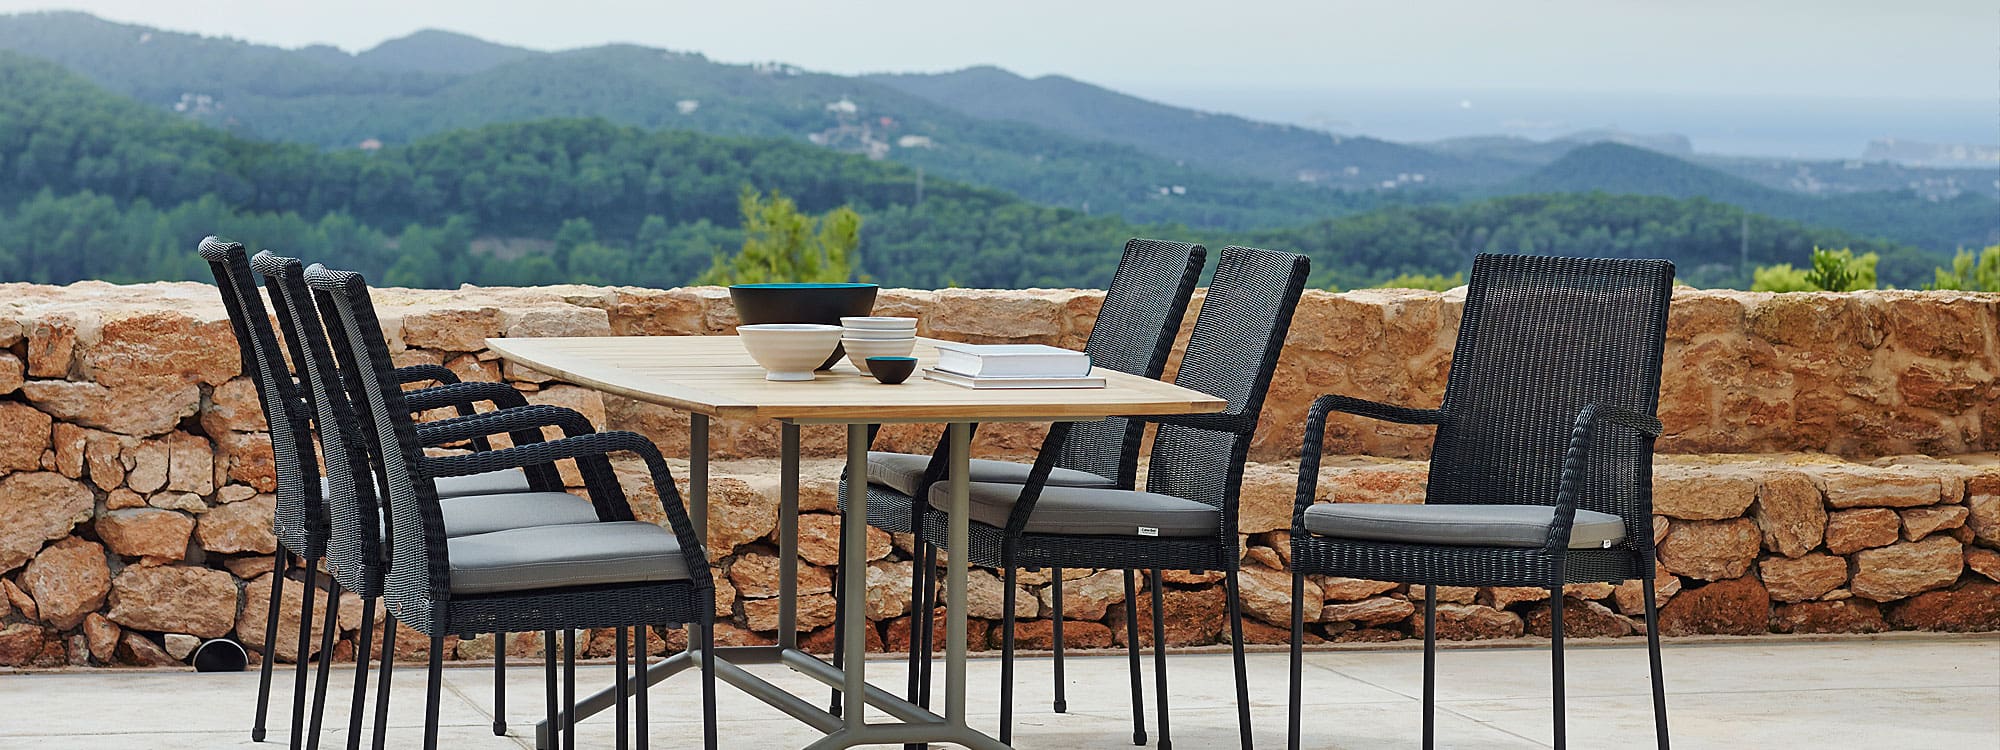 Image of Newport black rattan outdoor armchairs around Cane-line teak garden table, with rolling countryside in background